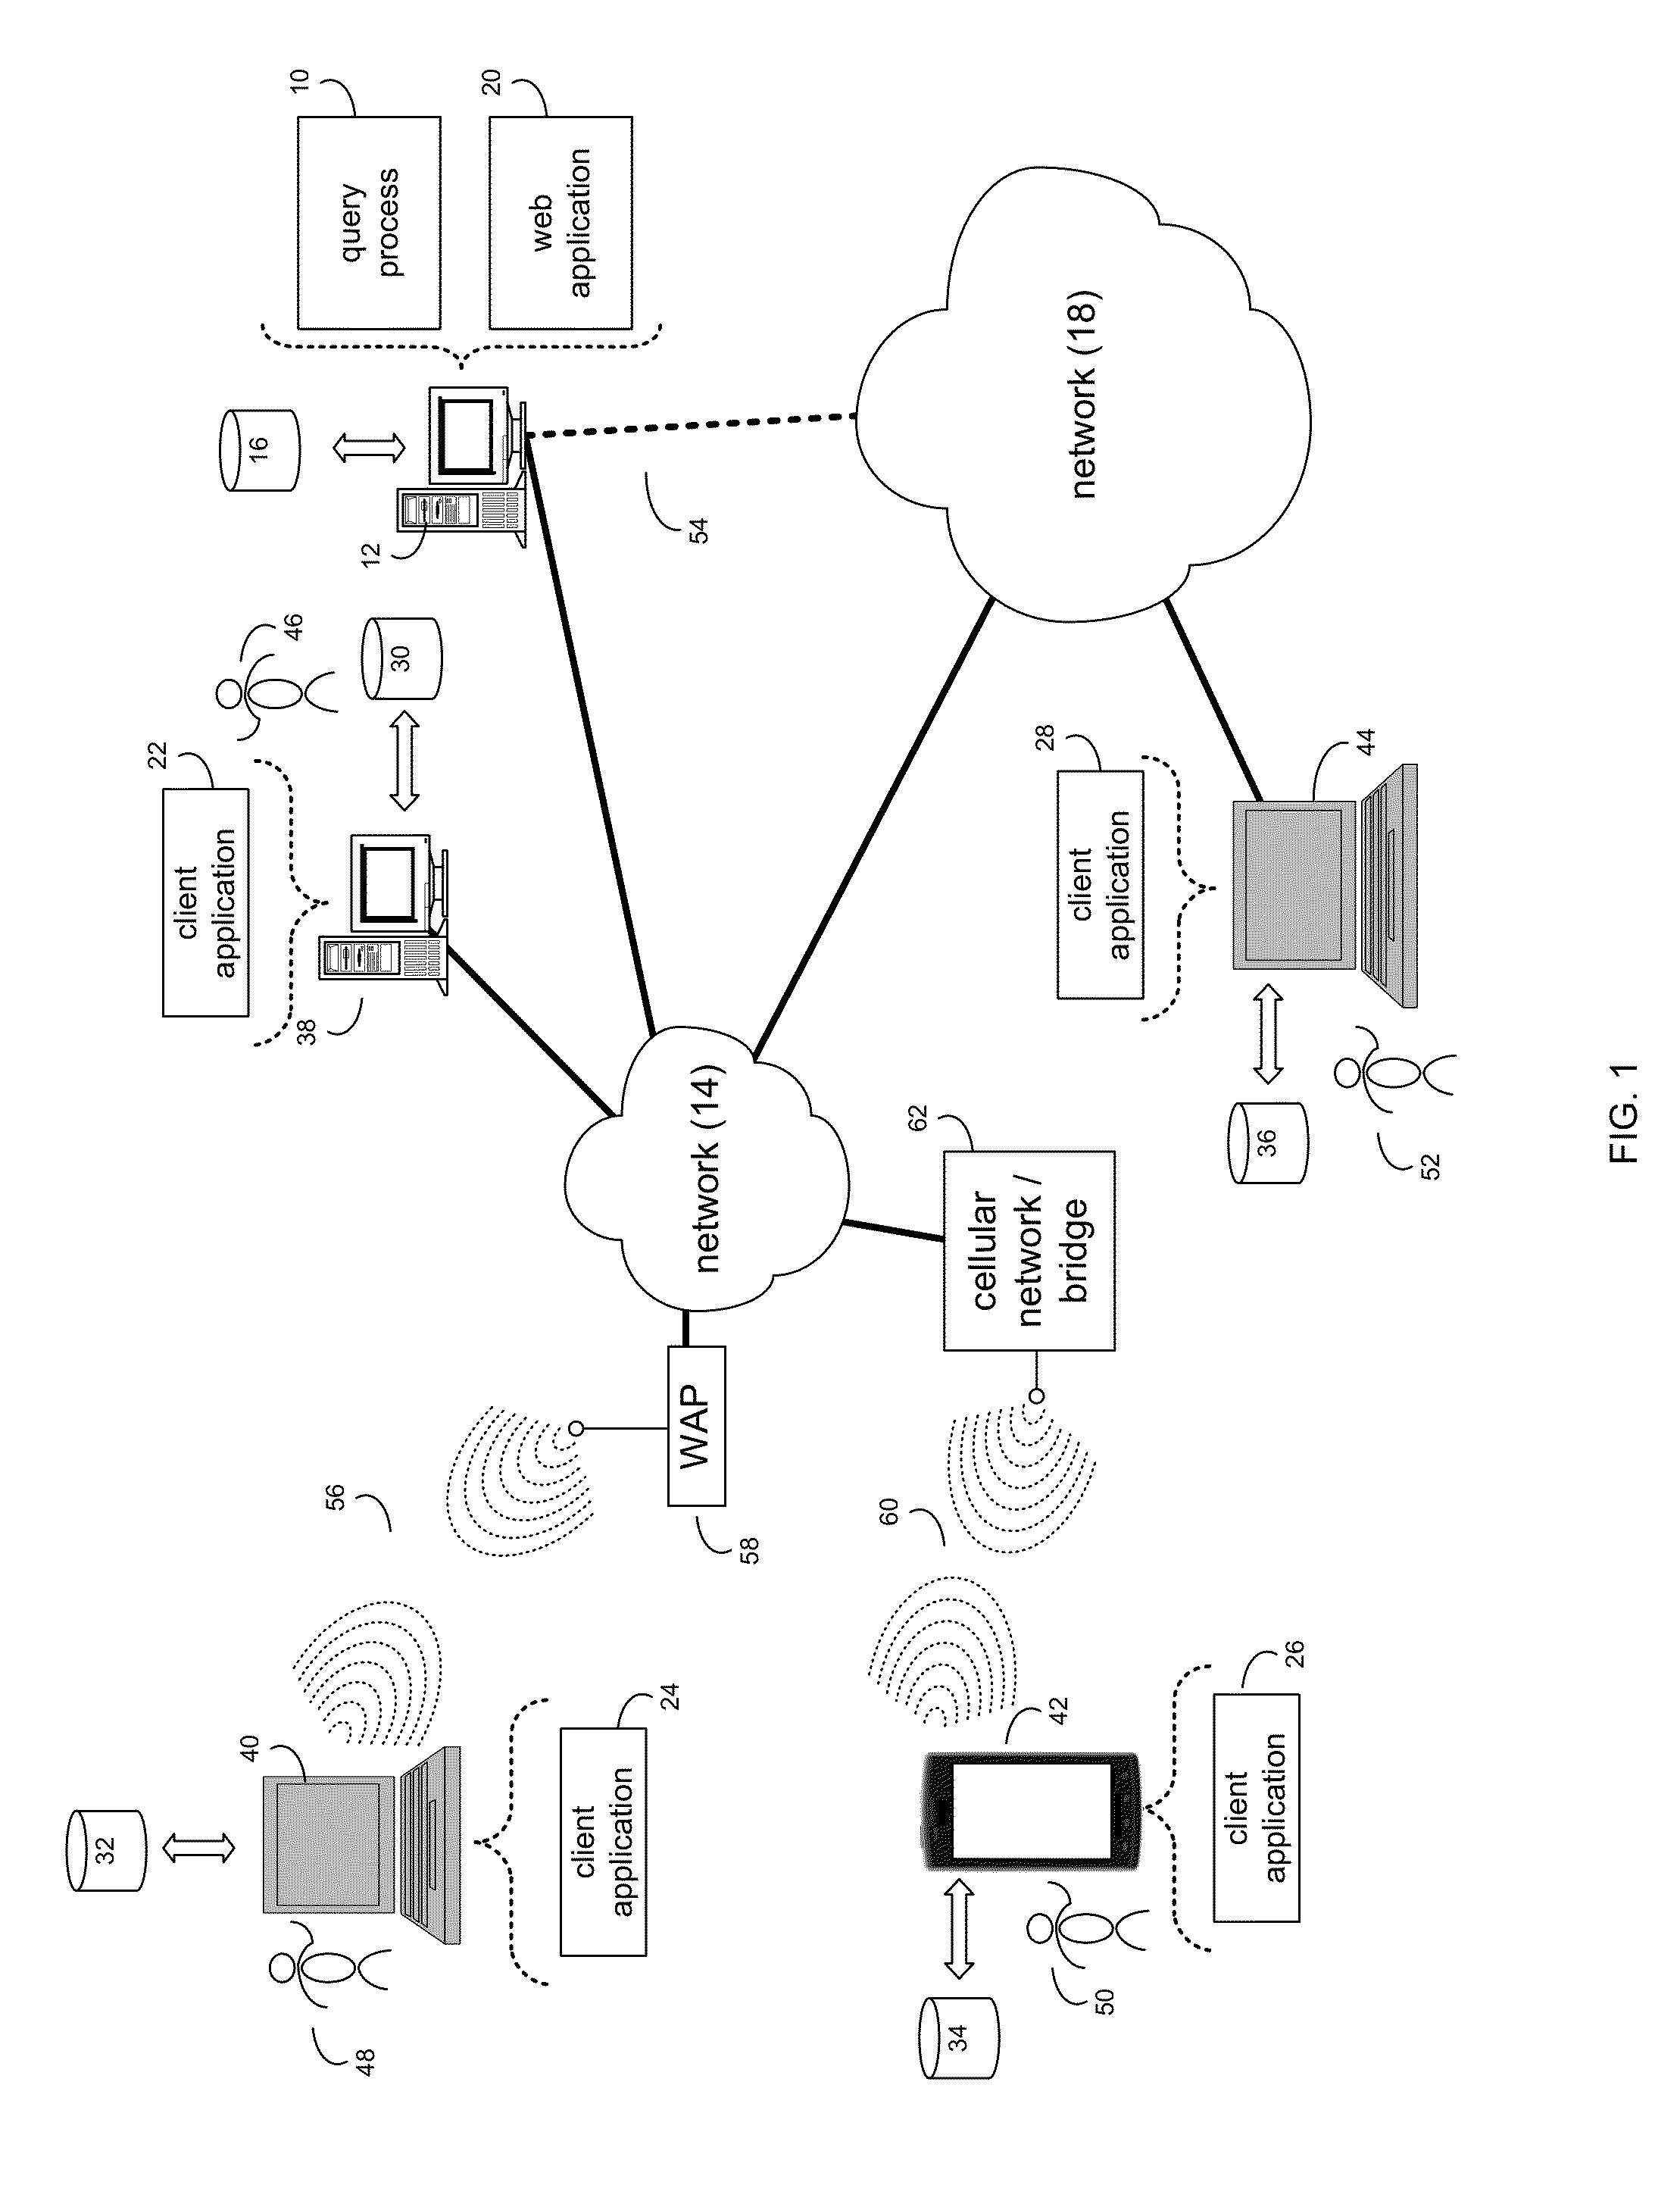 System and method for determining relevance of social content